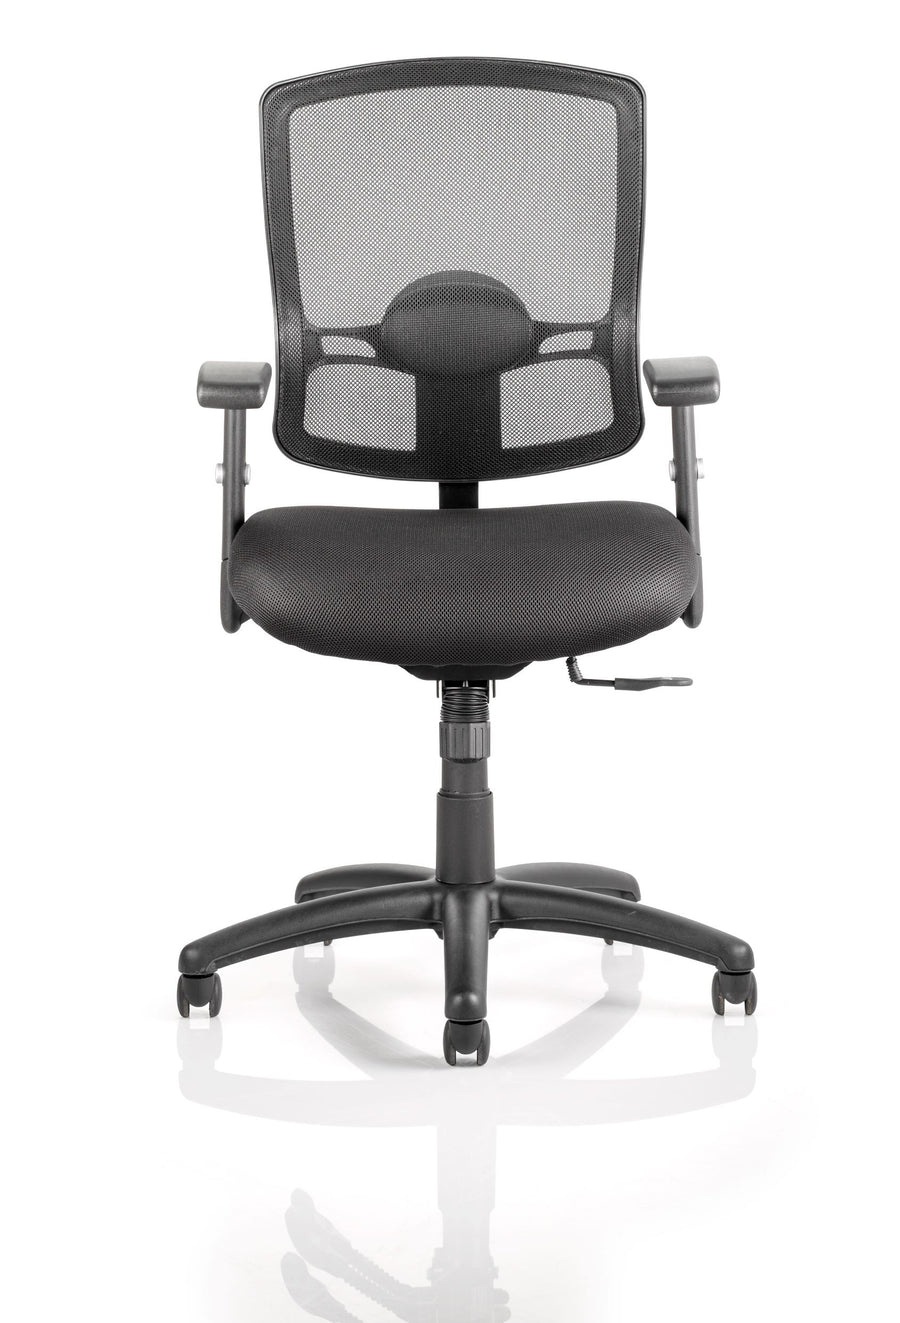 Dynamic OP000105 office/computer chair Upholstered padded seat Mesh backrest